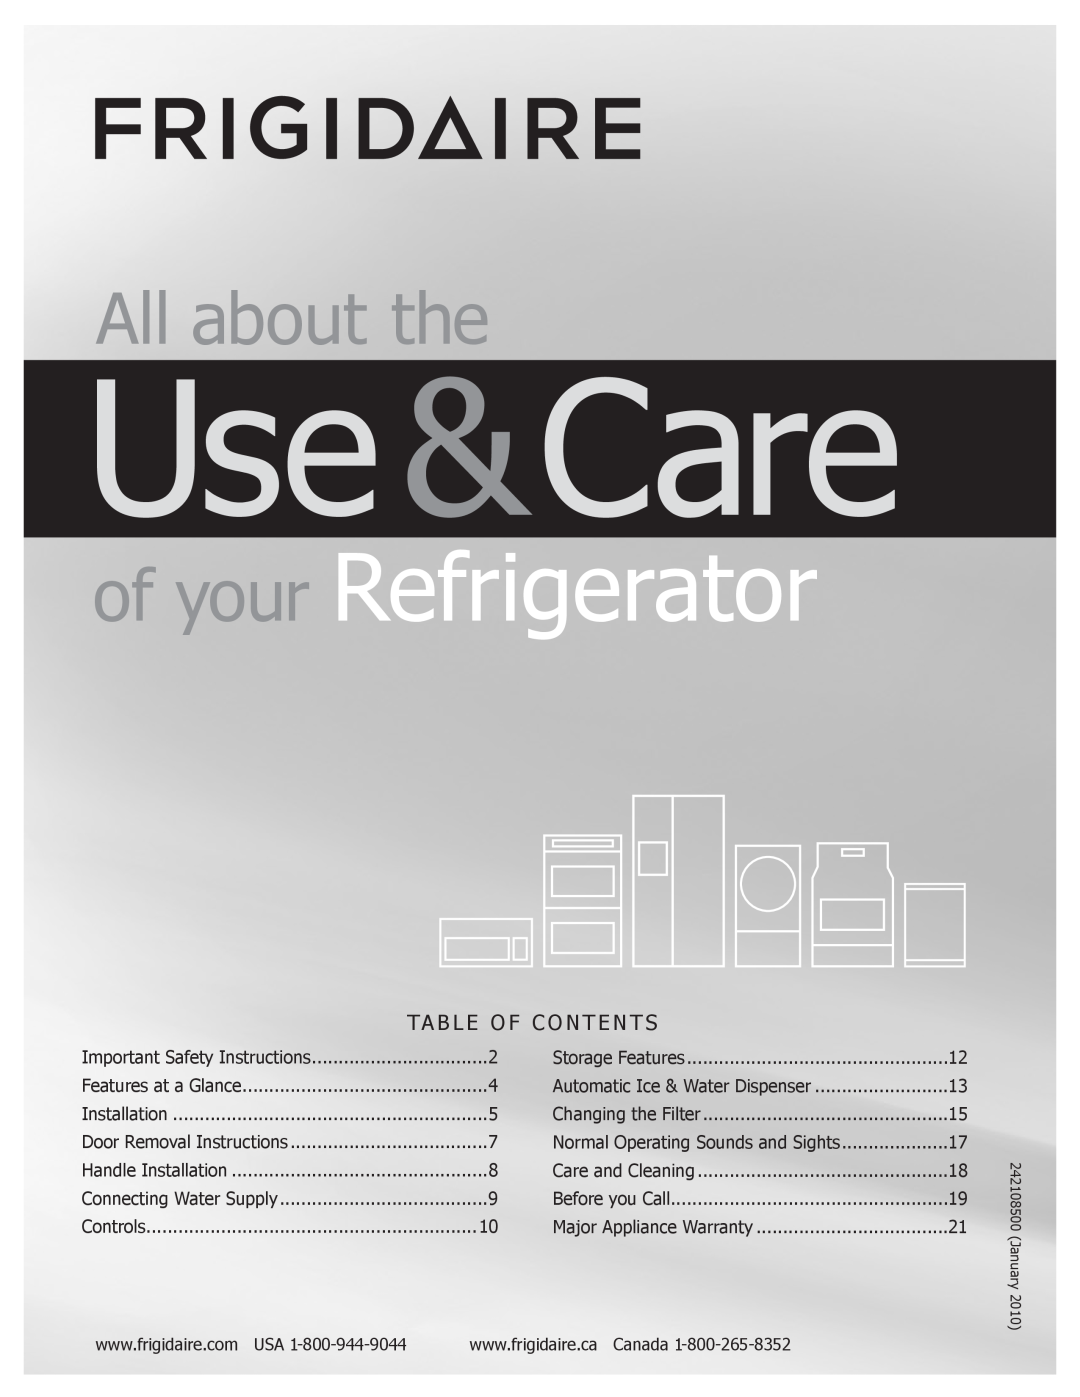 Frigidaire FPUS2686LF0 manual Use &Care, of your Refrigerator, All about the, Ta B L E O F C O N T E N T S, January 